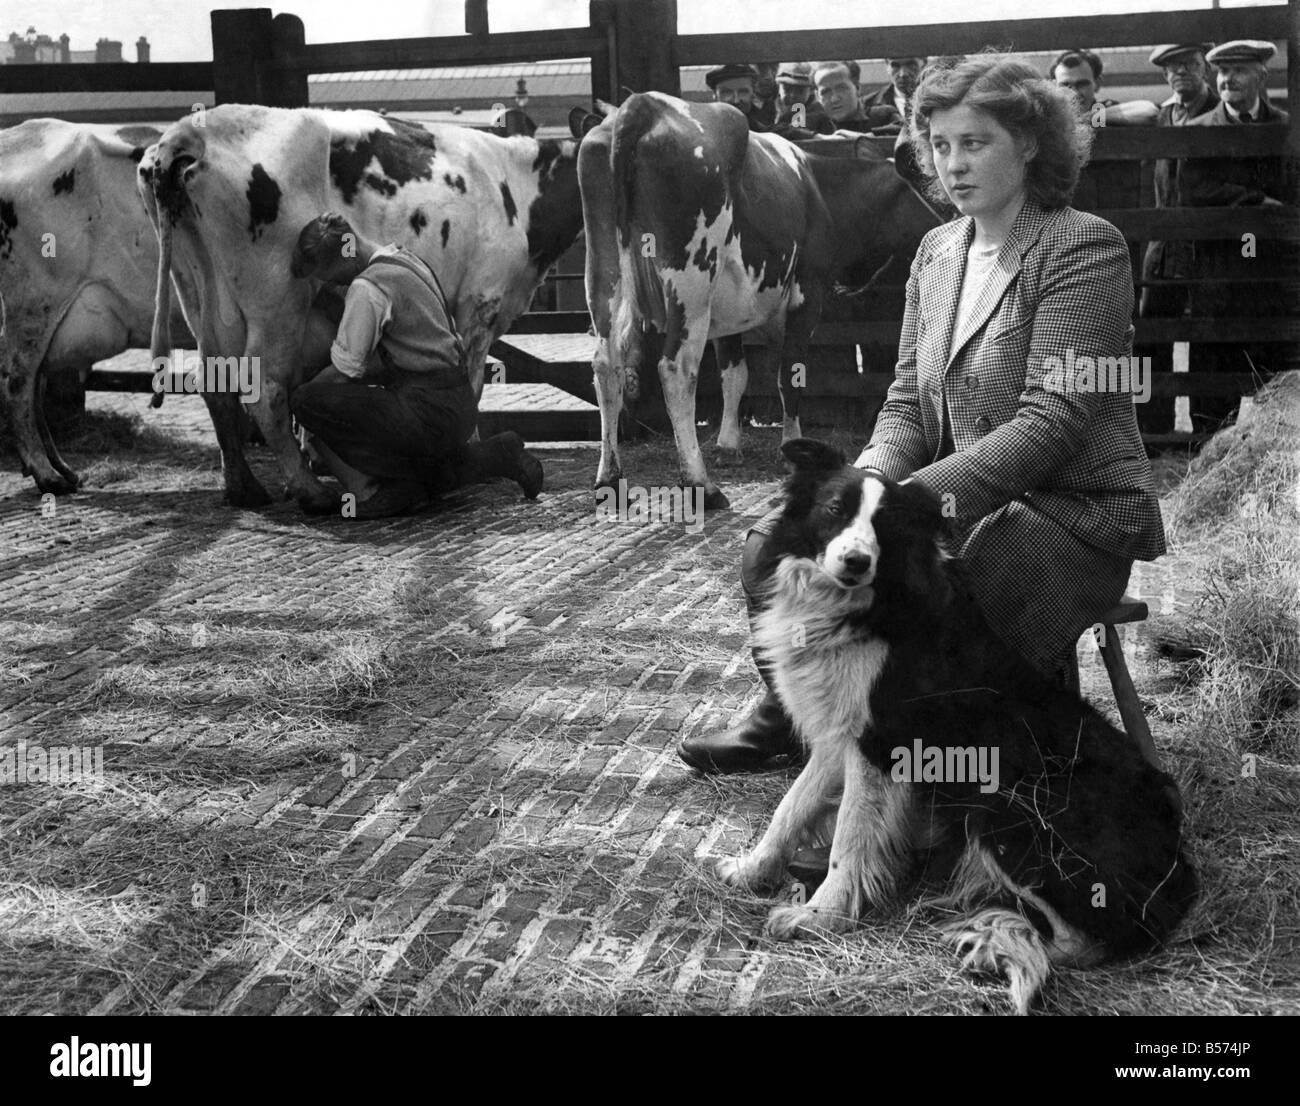 Farmer Baird has shifted his farm from Auchinleck, Ayrshire, to Andover by rail. Twelve hours after leaving Auchinleck the train stopped at Kentish Town, the cows unloaded and milked, fed and watered. Betty with the dog watches her brother, Wilson does the milking. May 1949 P004479 Stock Photo